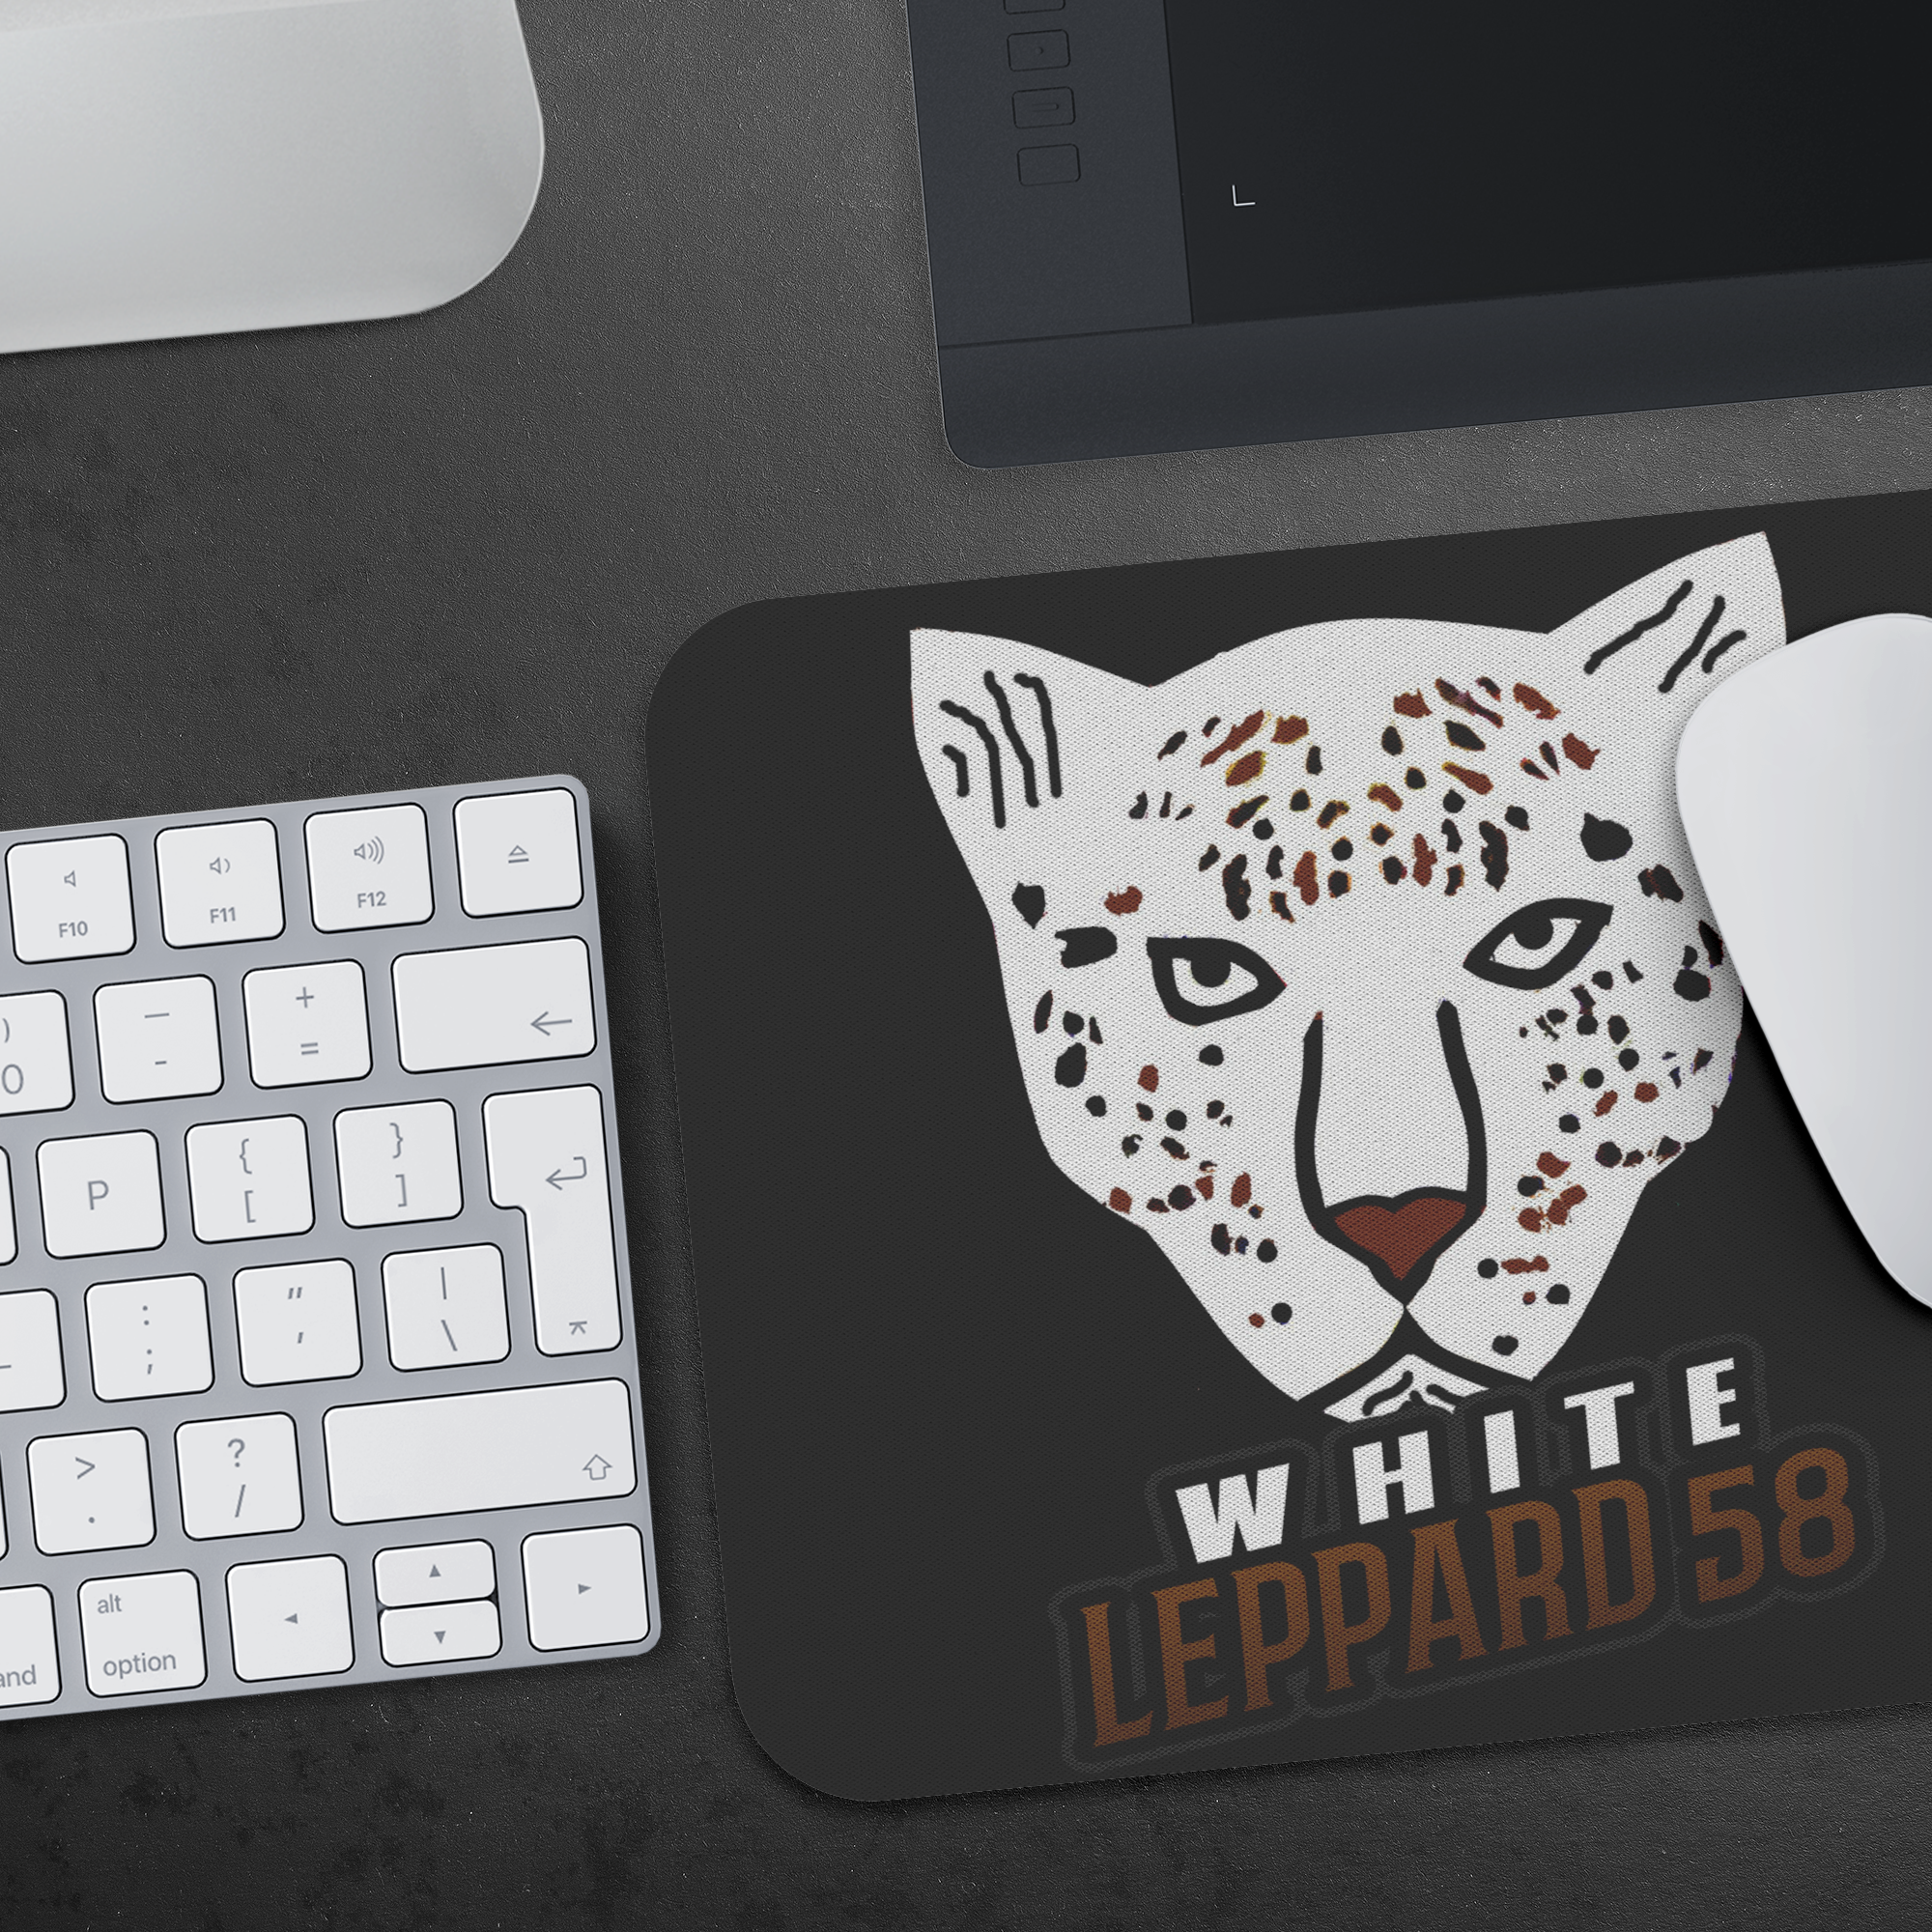 s-wl MOUSE PAD